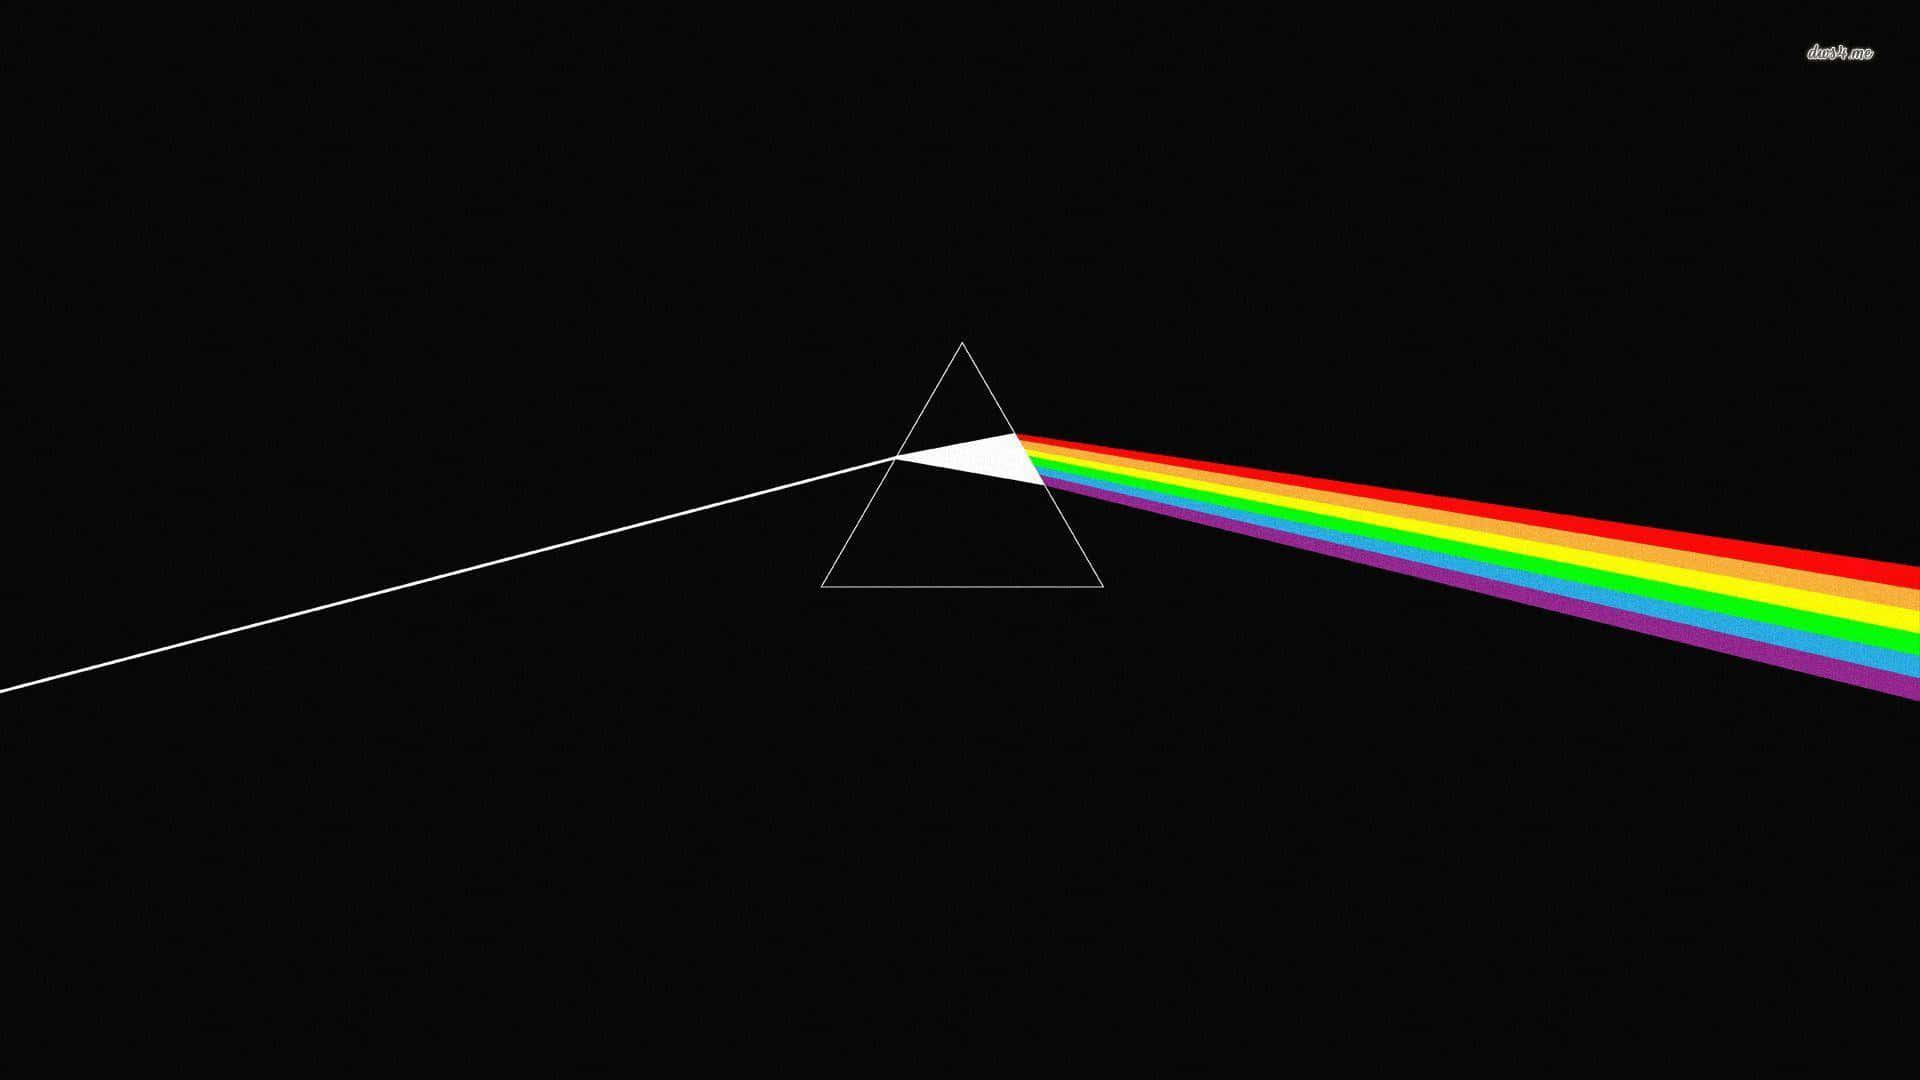 "Experience the dark side of the moon with this immersive Pink Floyd wallpaper" Wallpaper